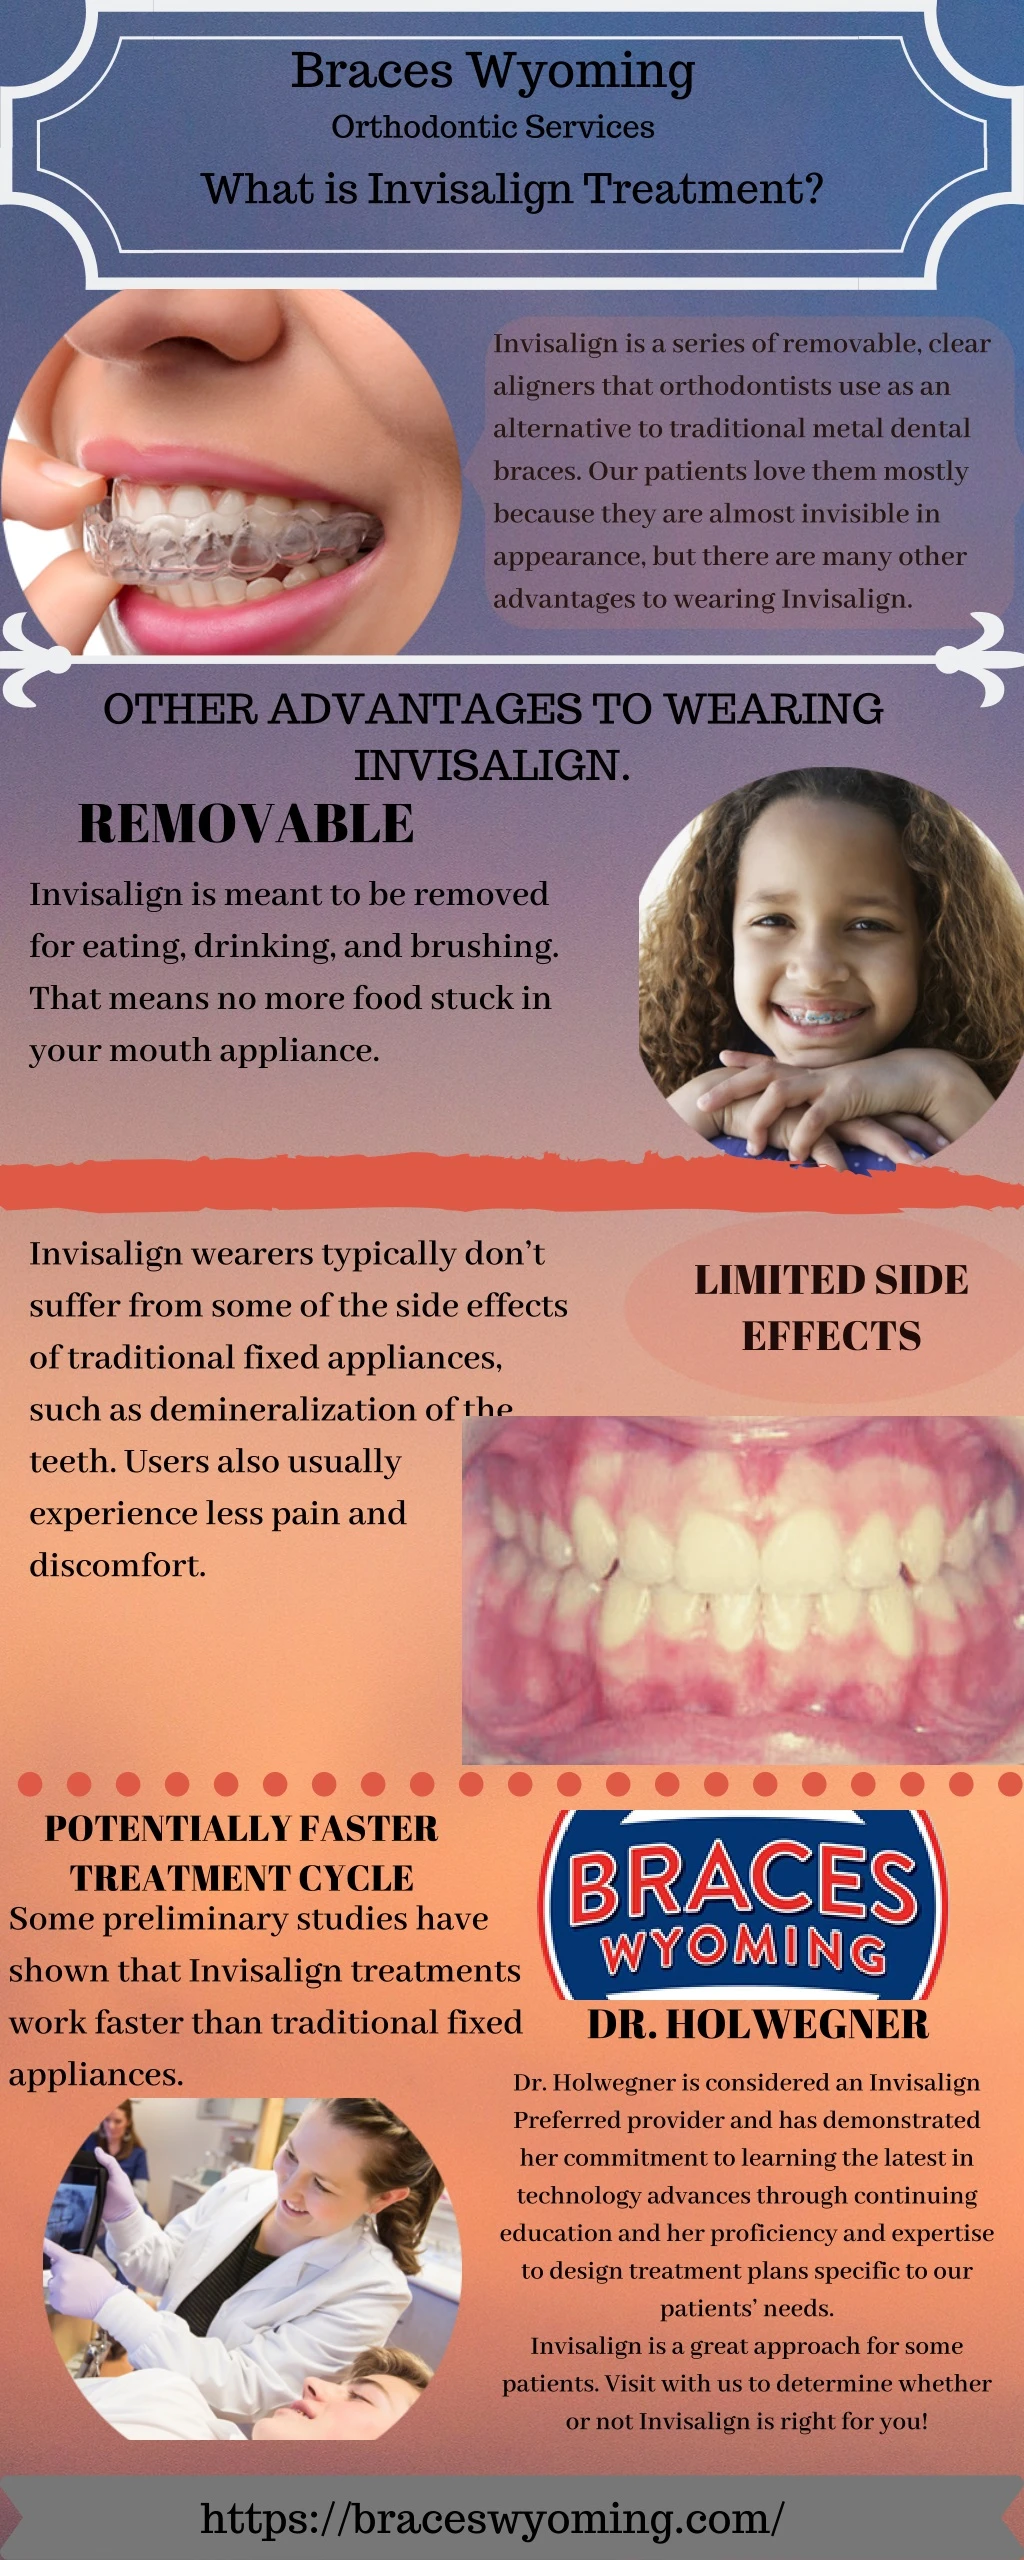 braces wyoming orthodontic services what